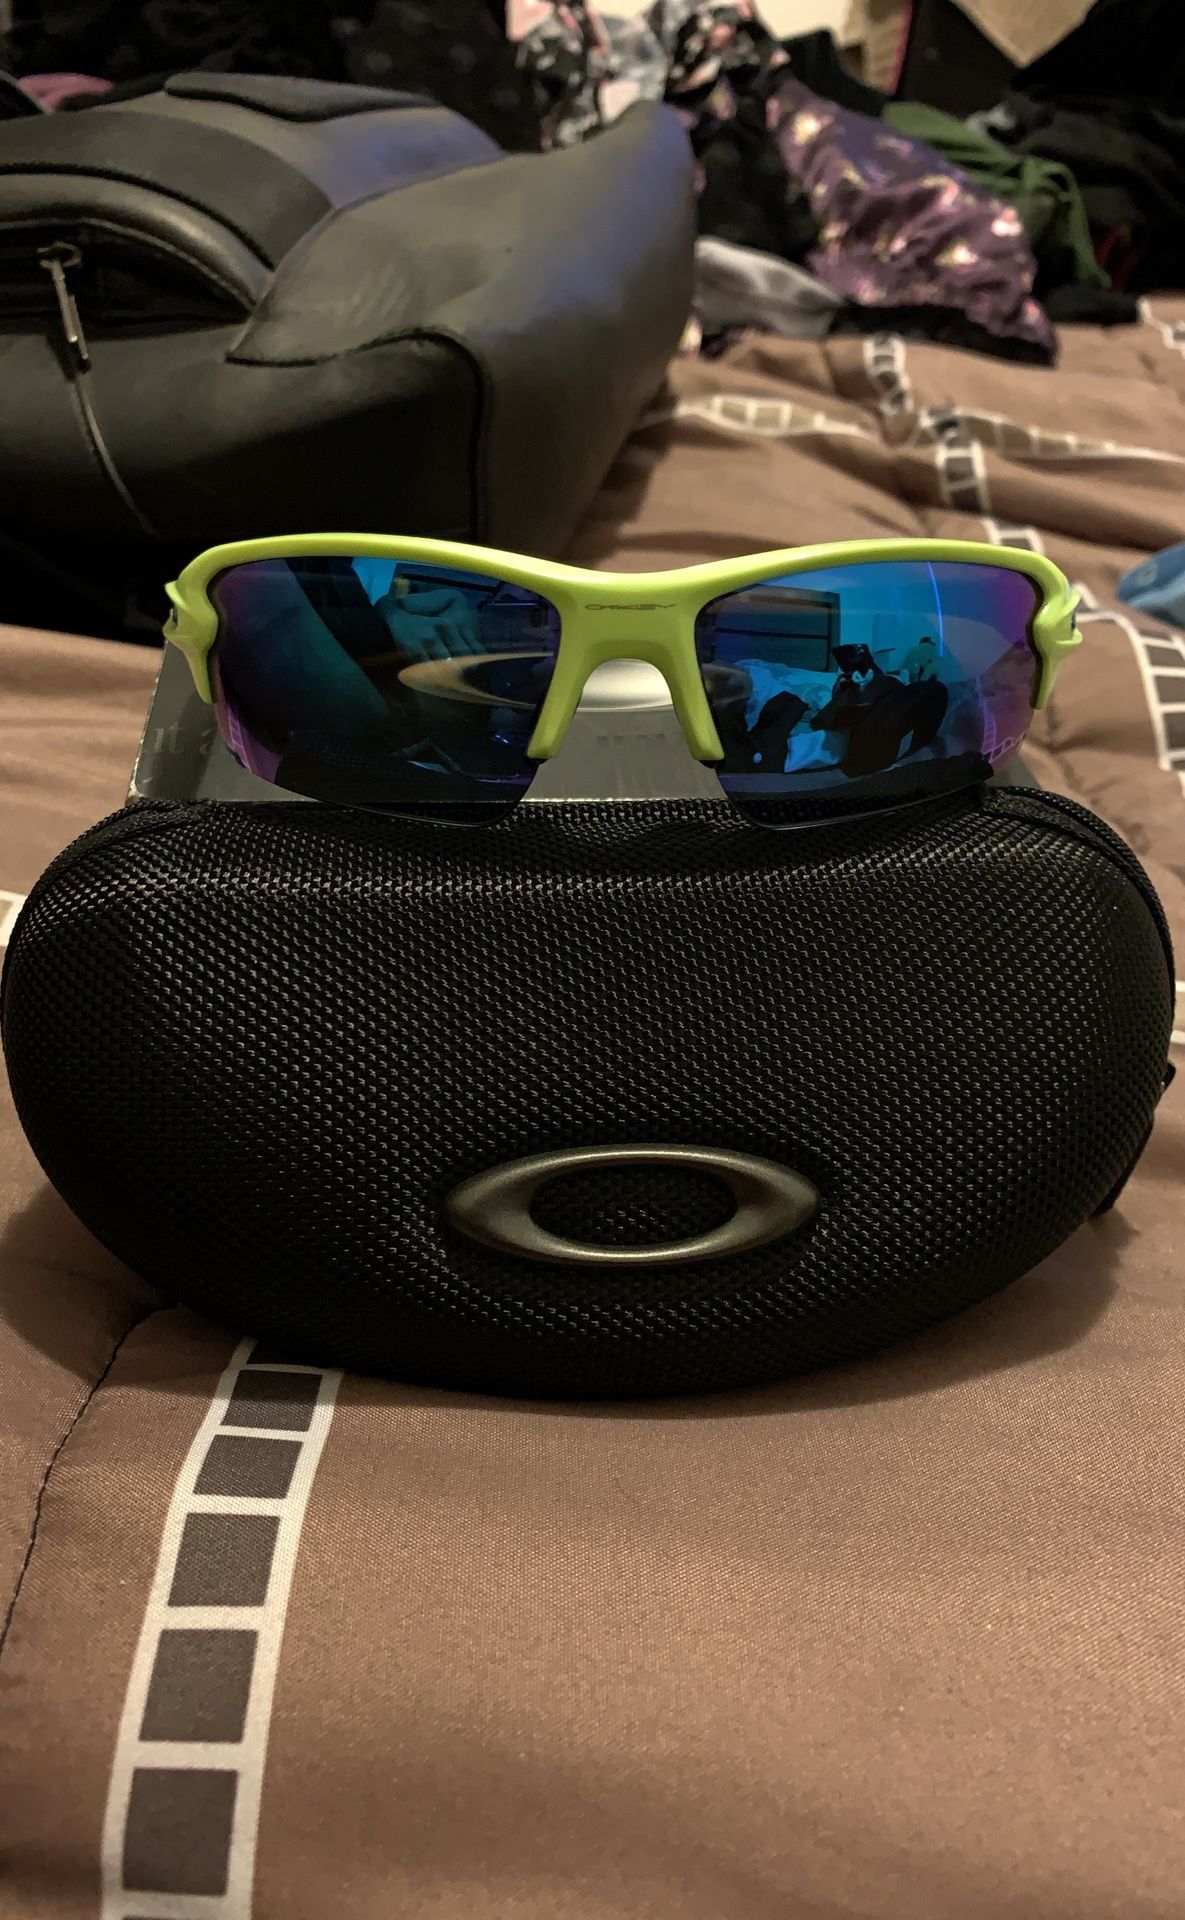 New and authentic Oakley flak2.0 sunglasses